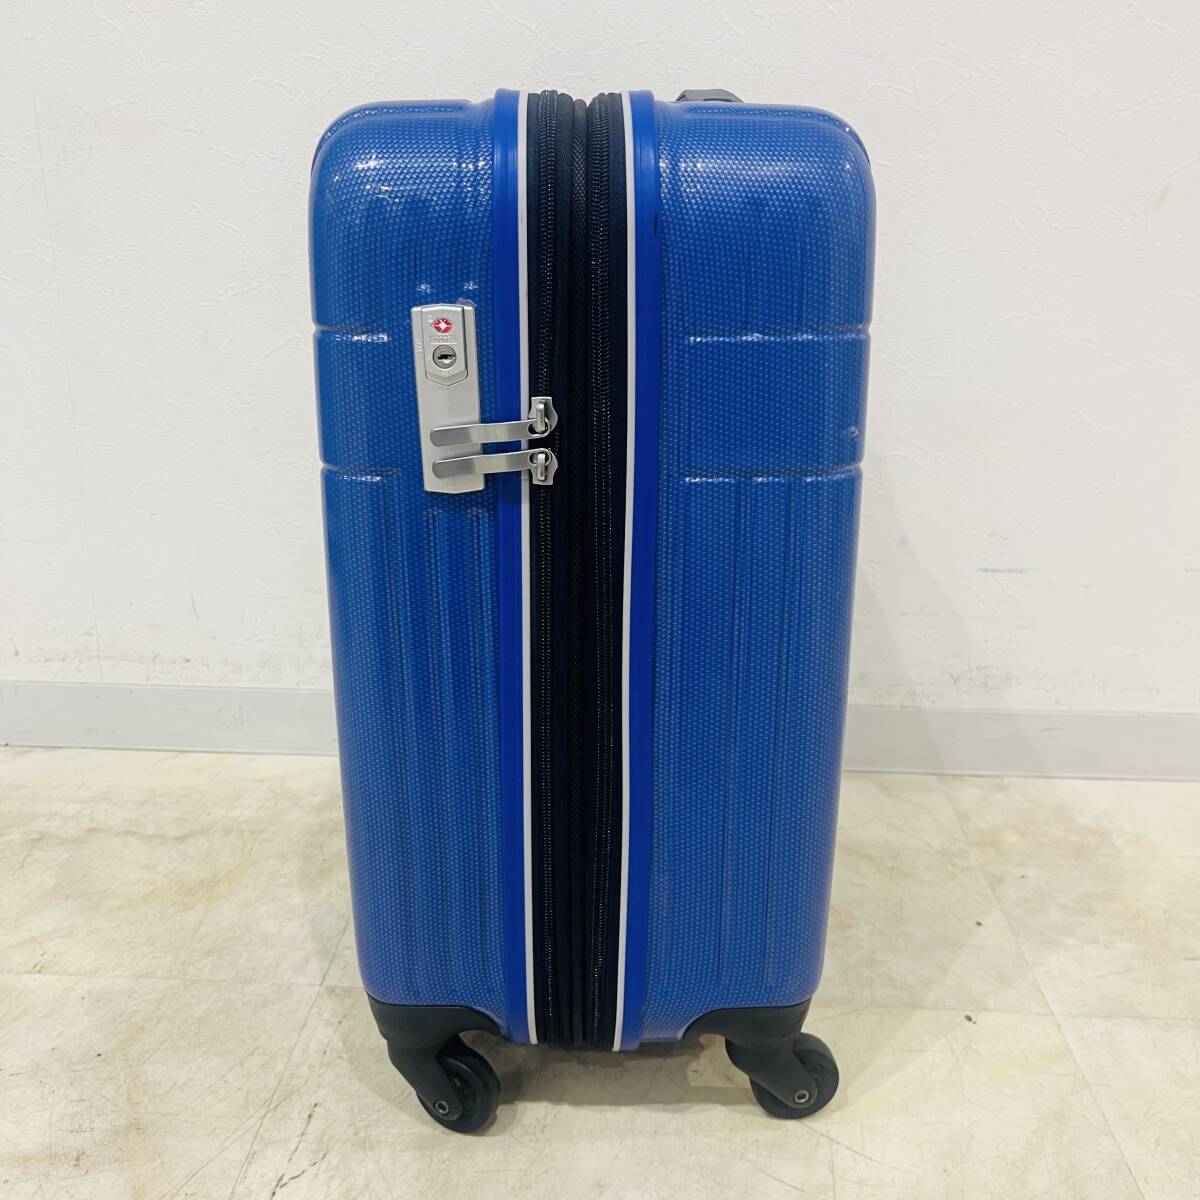 QA1921 have been cleaned light weight Carry case SKYNAVIGATOR Sky Navigator inset enhancing possible suitcase carry bag TSA lock inspection K